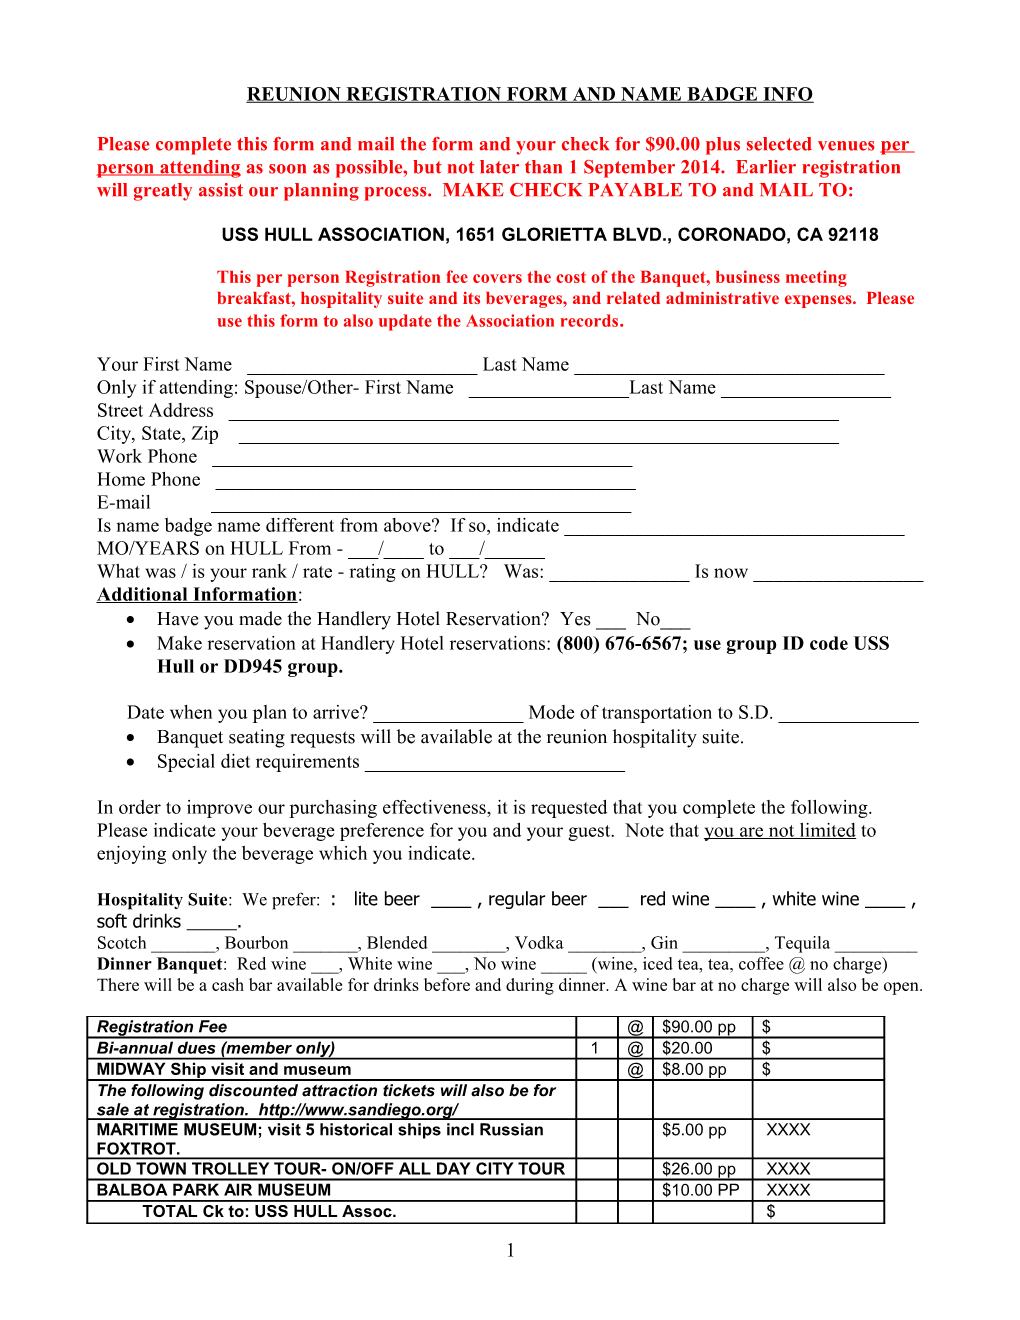 Reunion Registration Form and Name Badge Info